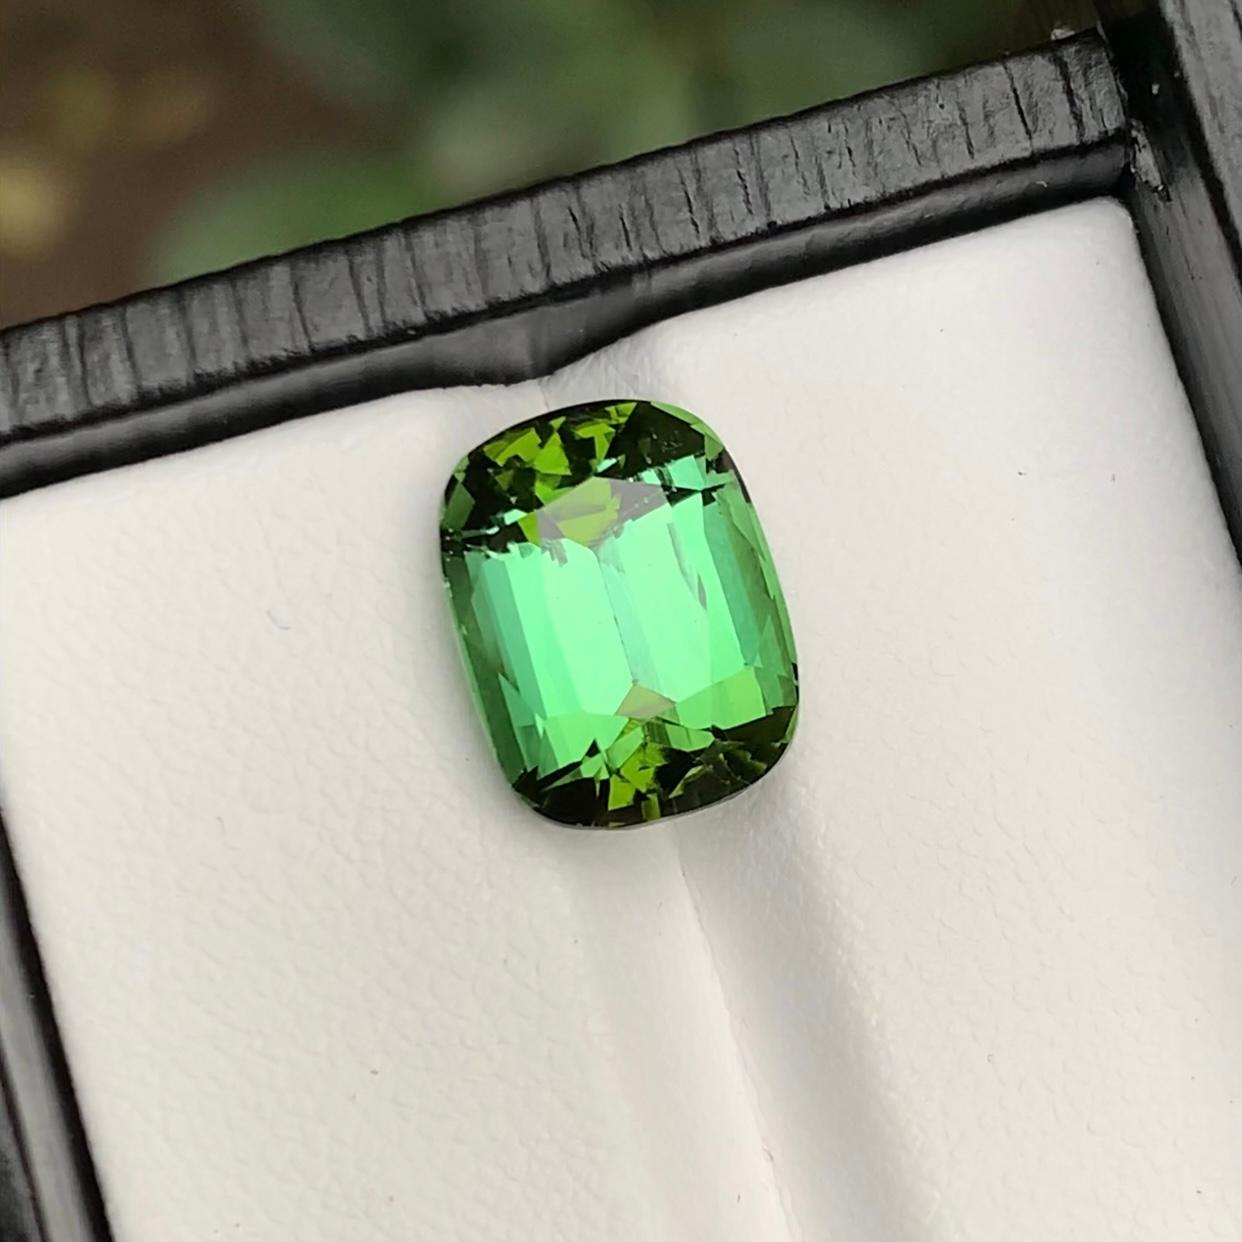 GEMSTONE TYPE: Tourmaline
PIECE(S): 1
WEIGHT: 5.90 Carats
SHAPE: Step Cushion Mix Cut
SIZE (MM): 12.01 x 9.21 x 7.36
COLOR: Green
CLARITY: Approx Eye Clean
TREATMENT: None
ORIGIN: Afghanistan
CERTIFICATE: On demand
(if you require a certificate,